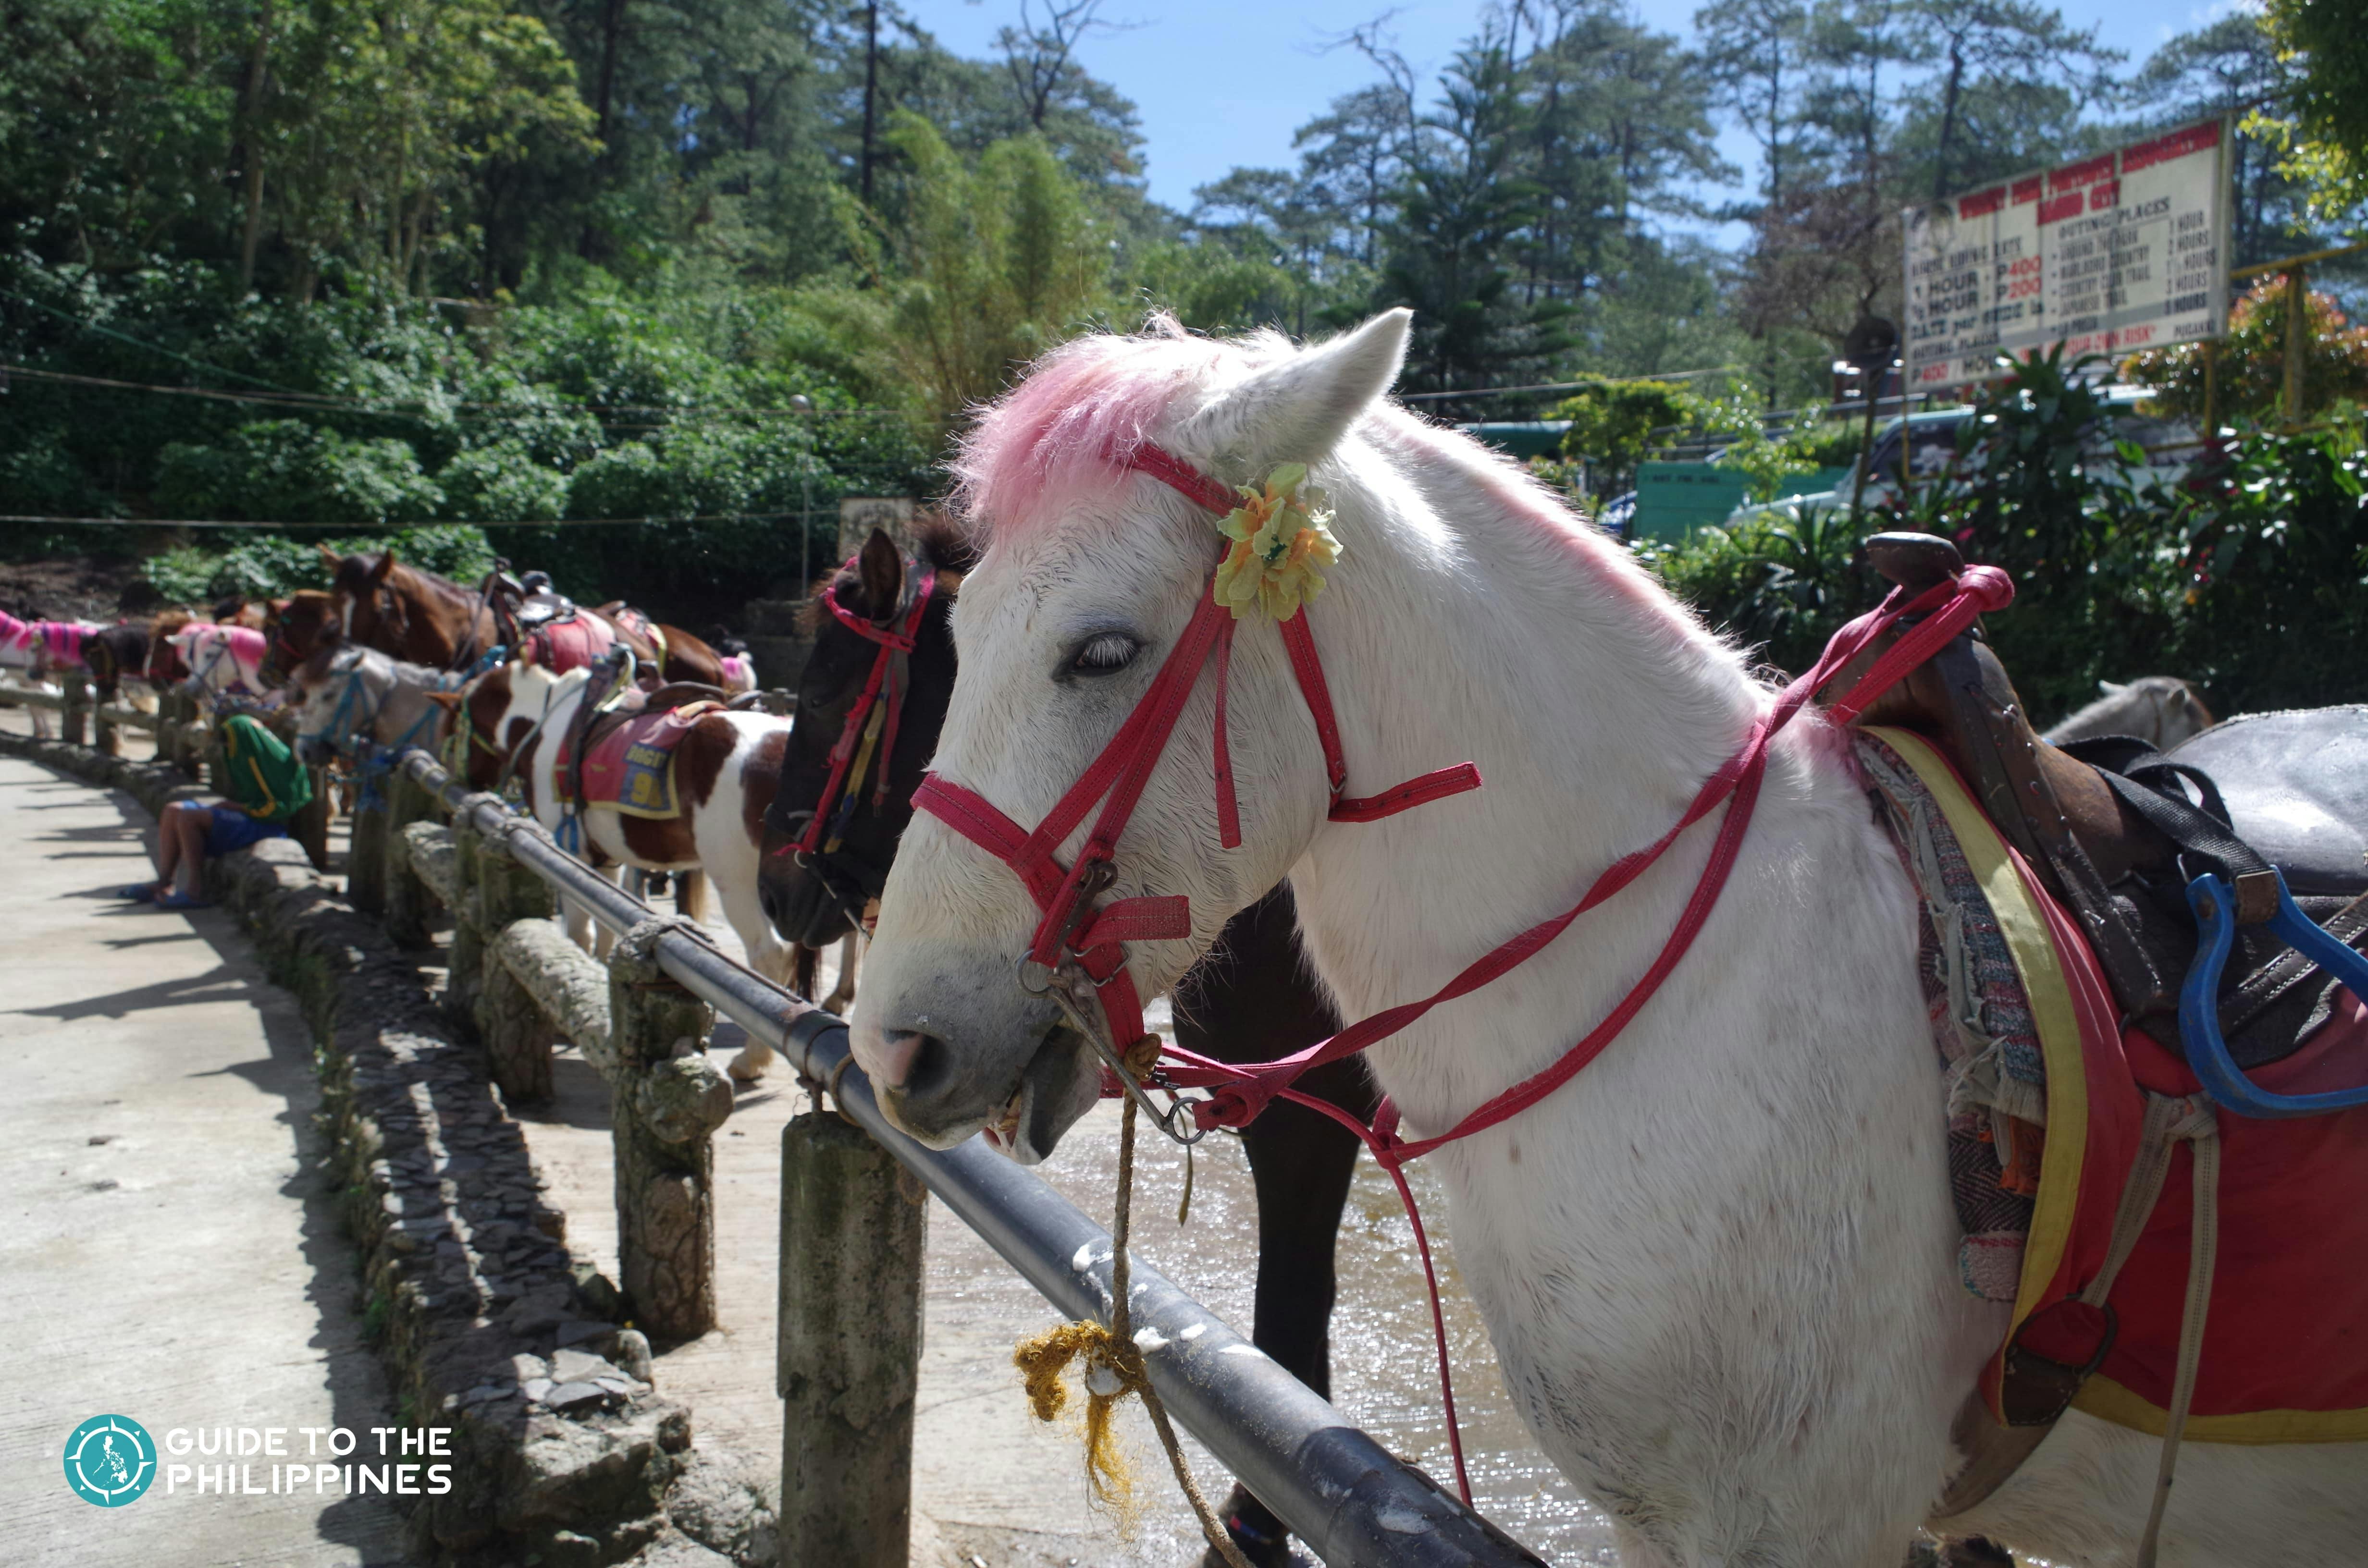 Horses in Wright Park, Baguio City